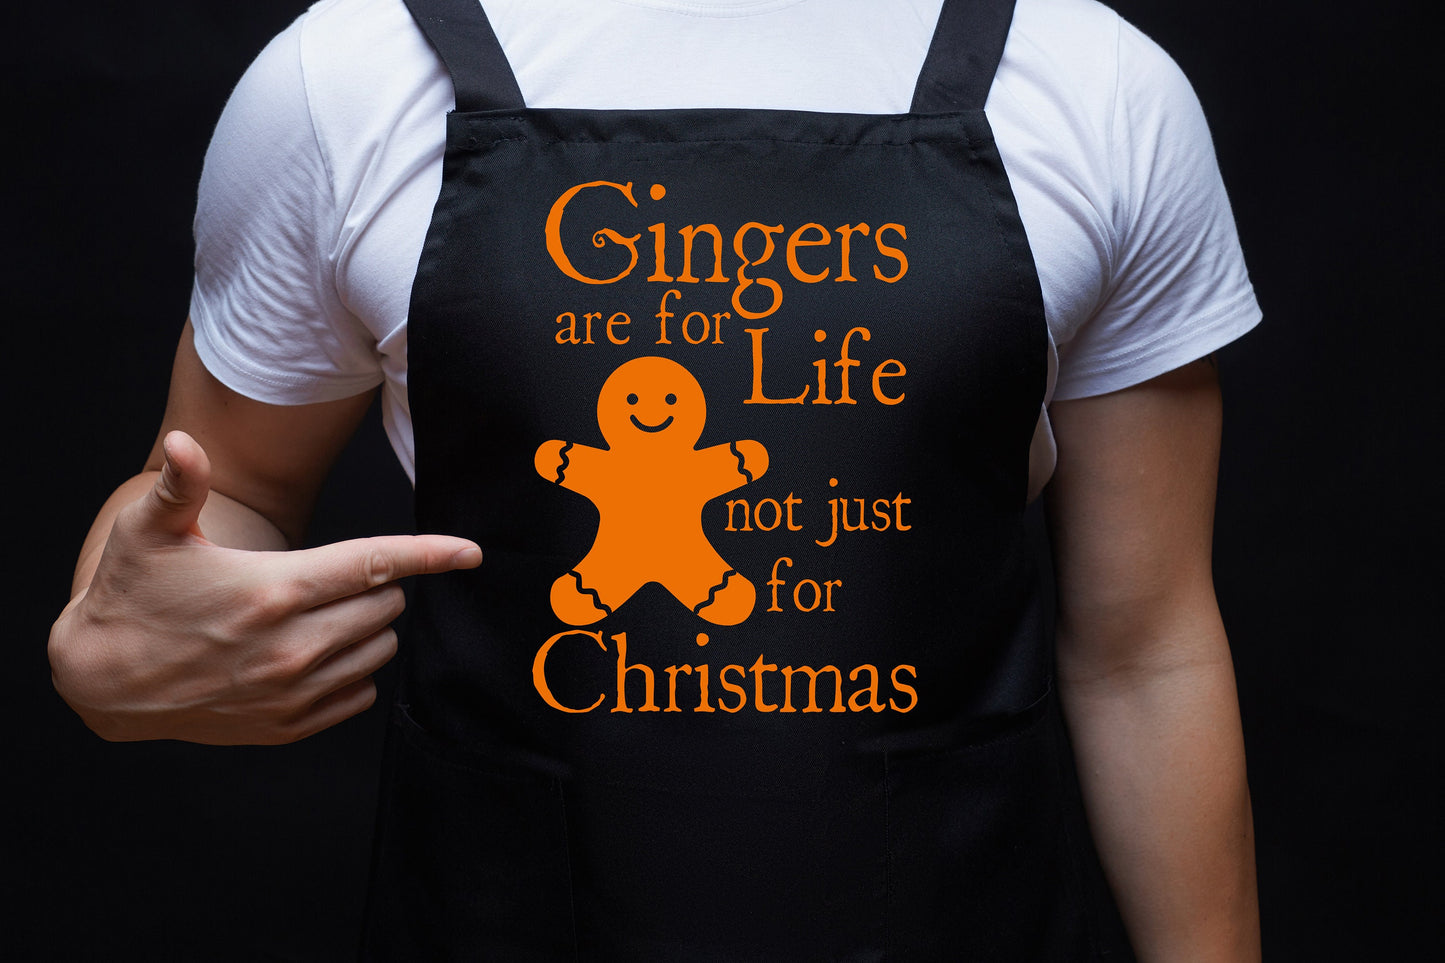 Gingers Are for Life Organic Cotton Apron PR102 Funny Not Just for Christmas Dinner Apron